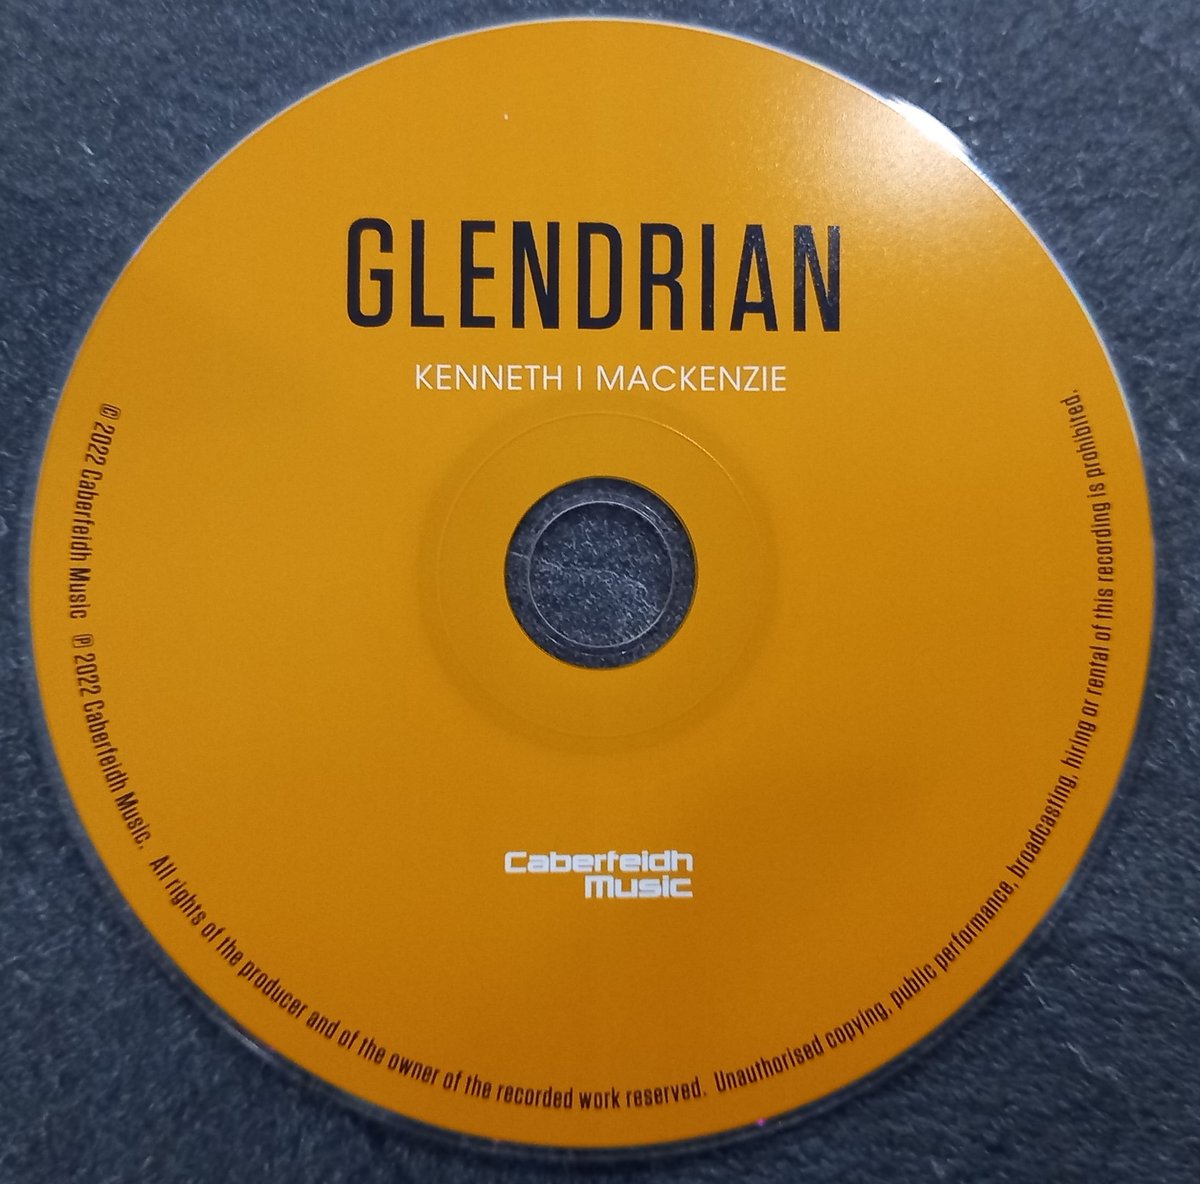 TODAY is #bandcampfriday the day @Bandcamp waive their revenue fee to support the musicians #Glendrian is available to download TODAY at:caberfeidhmusic.bandcamp.com also see Linktree in bio... #CaberfeidhMusic #scottishmusic #scottish